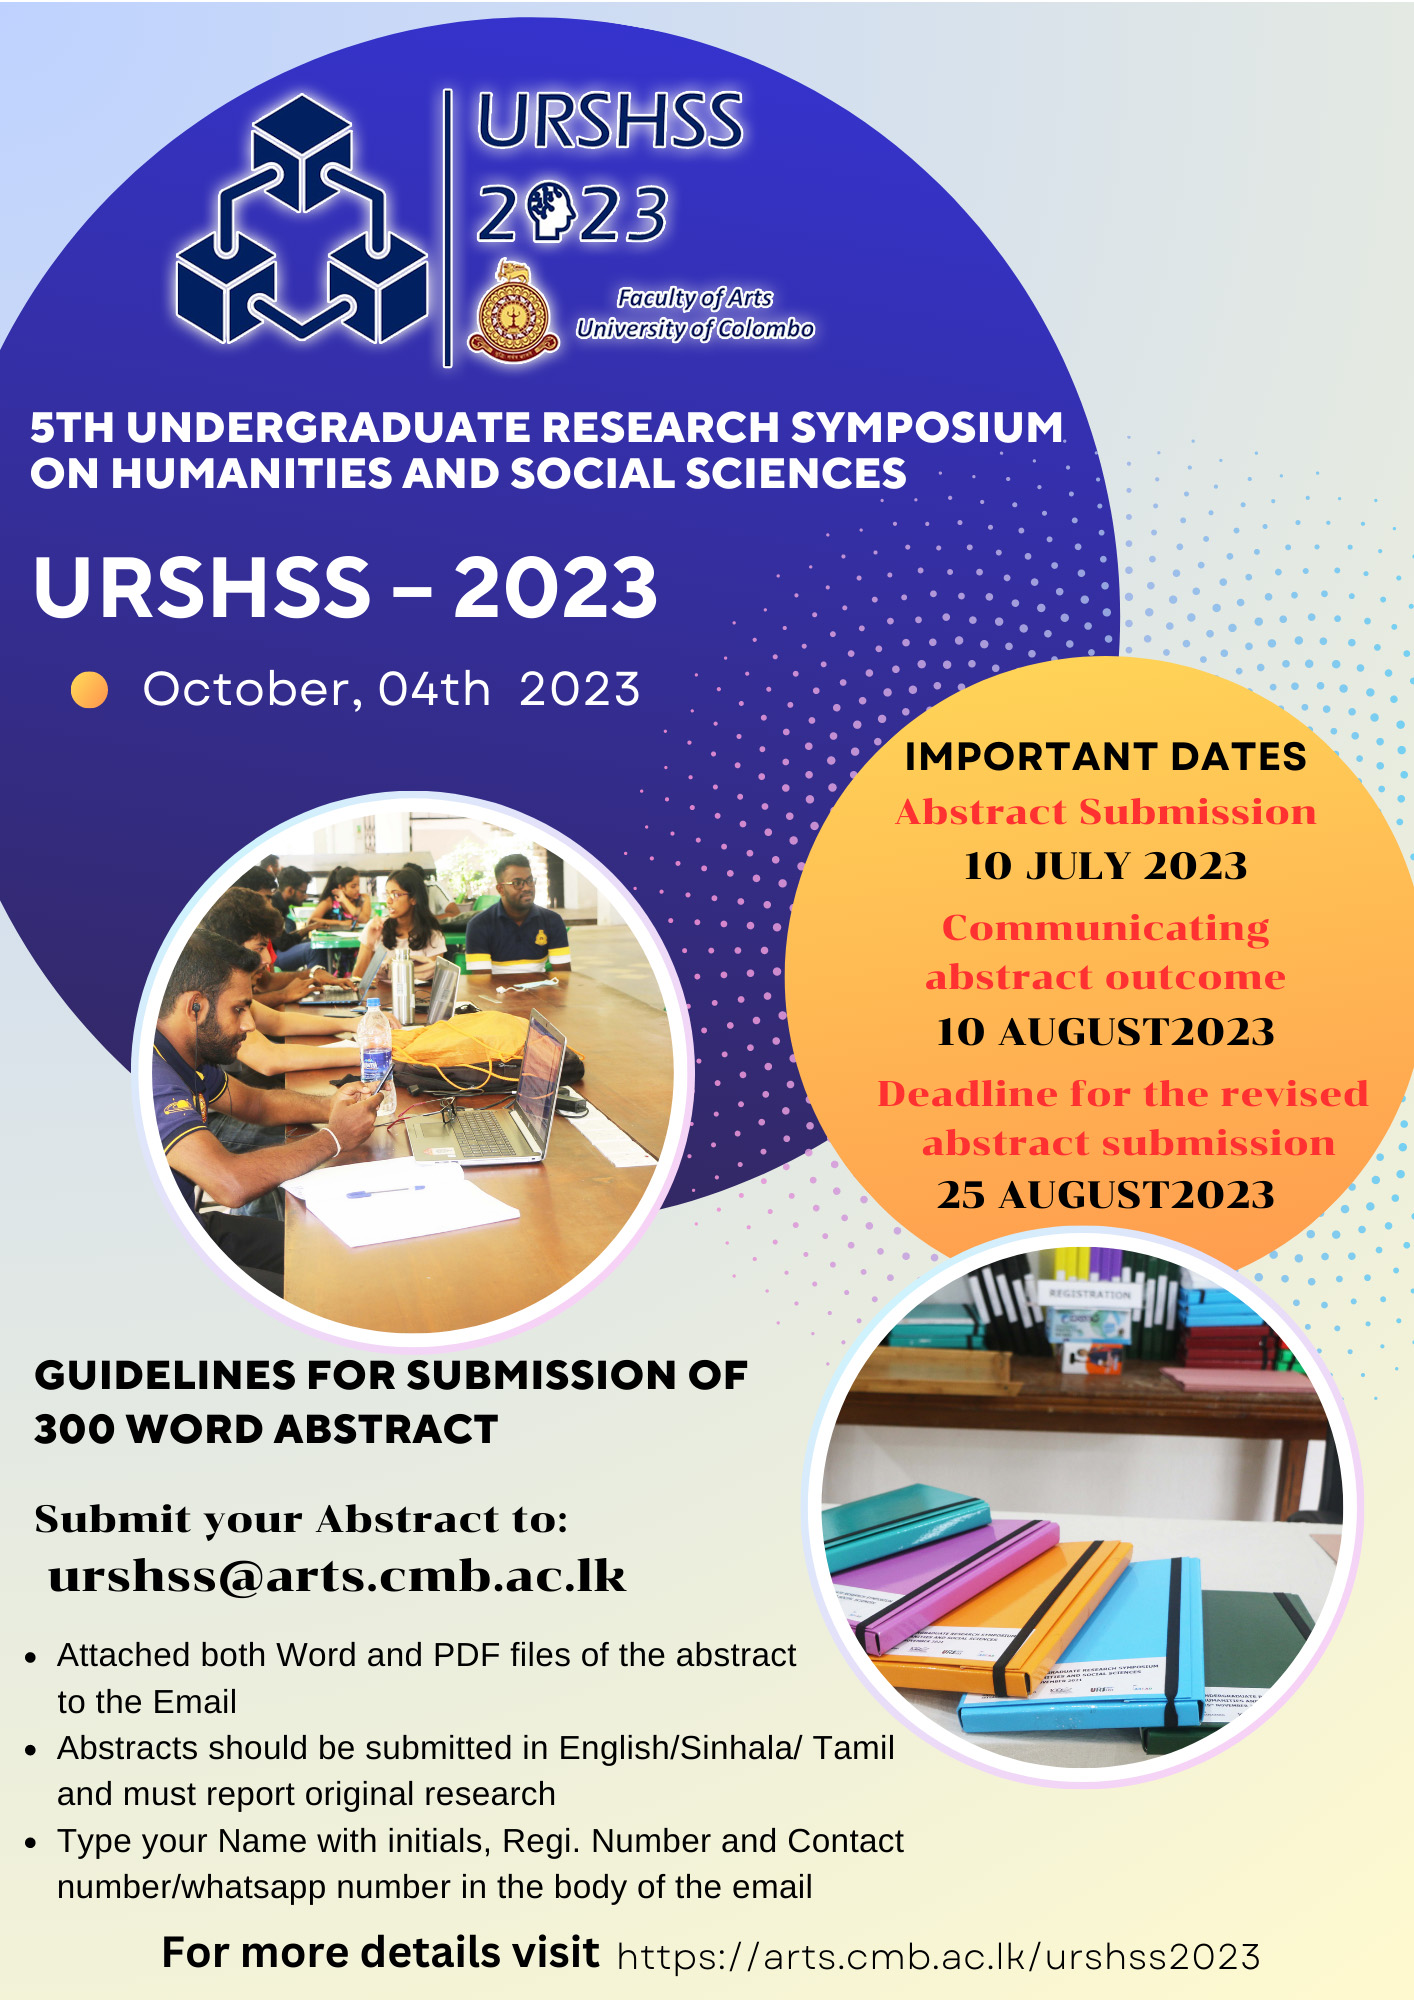 Undergraduate Research Symposium on Humanities and Social Sciences | Faculty of Arts